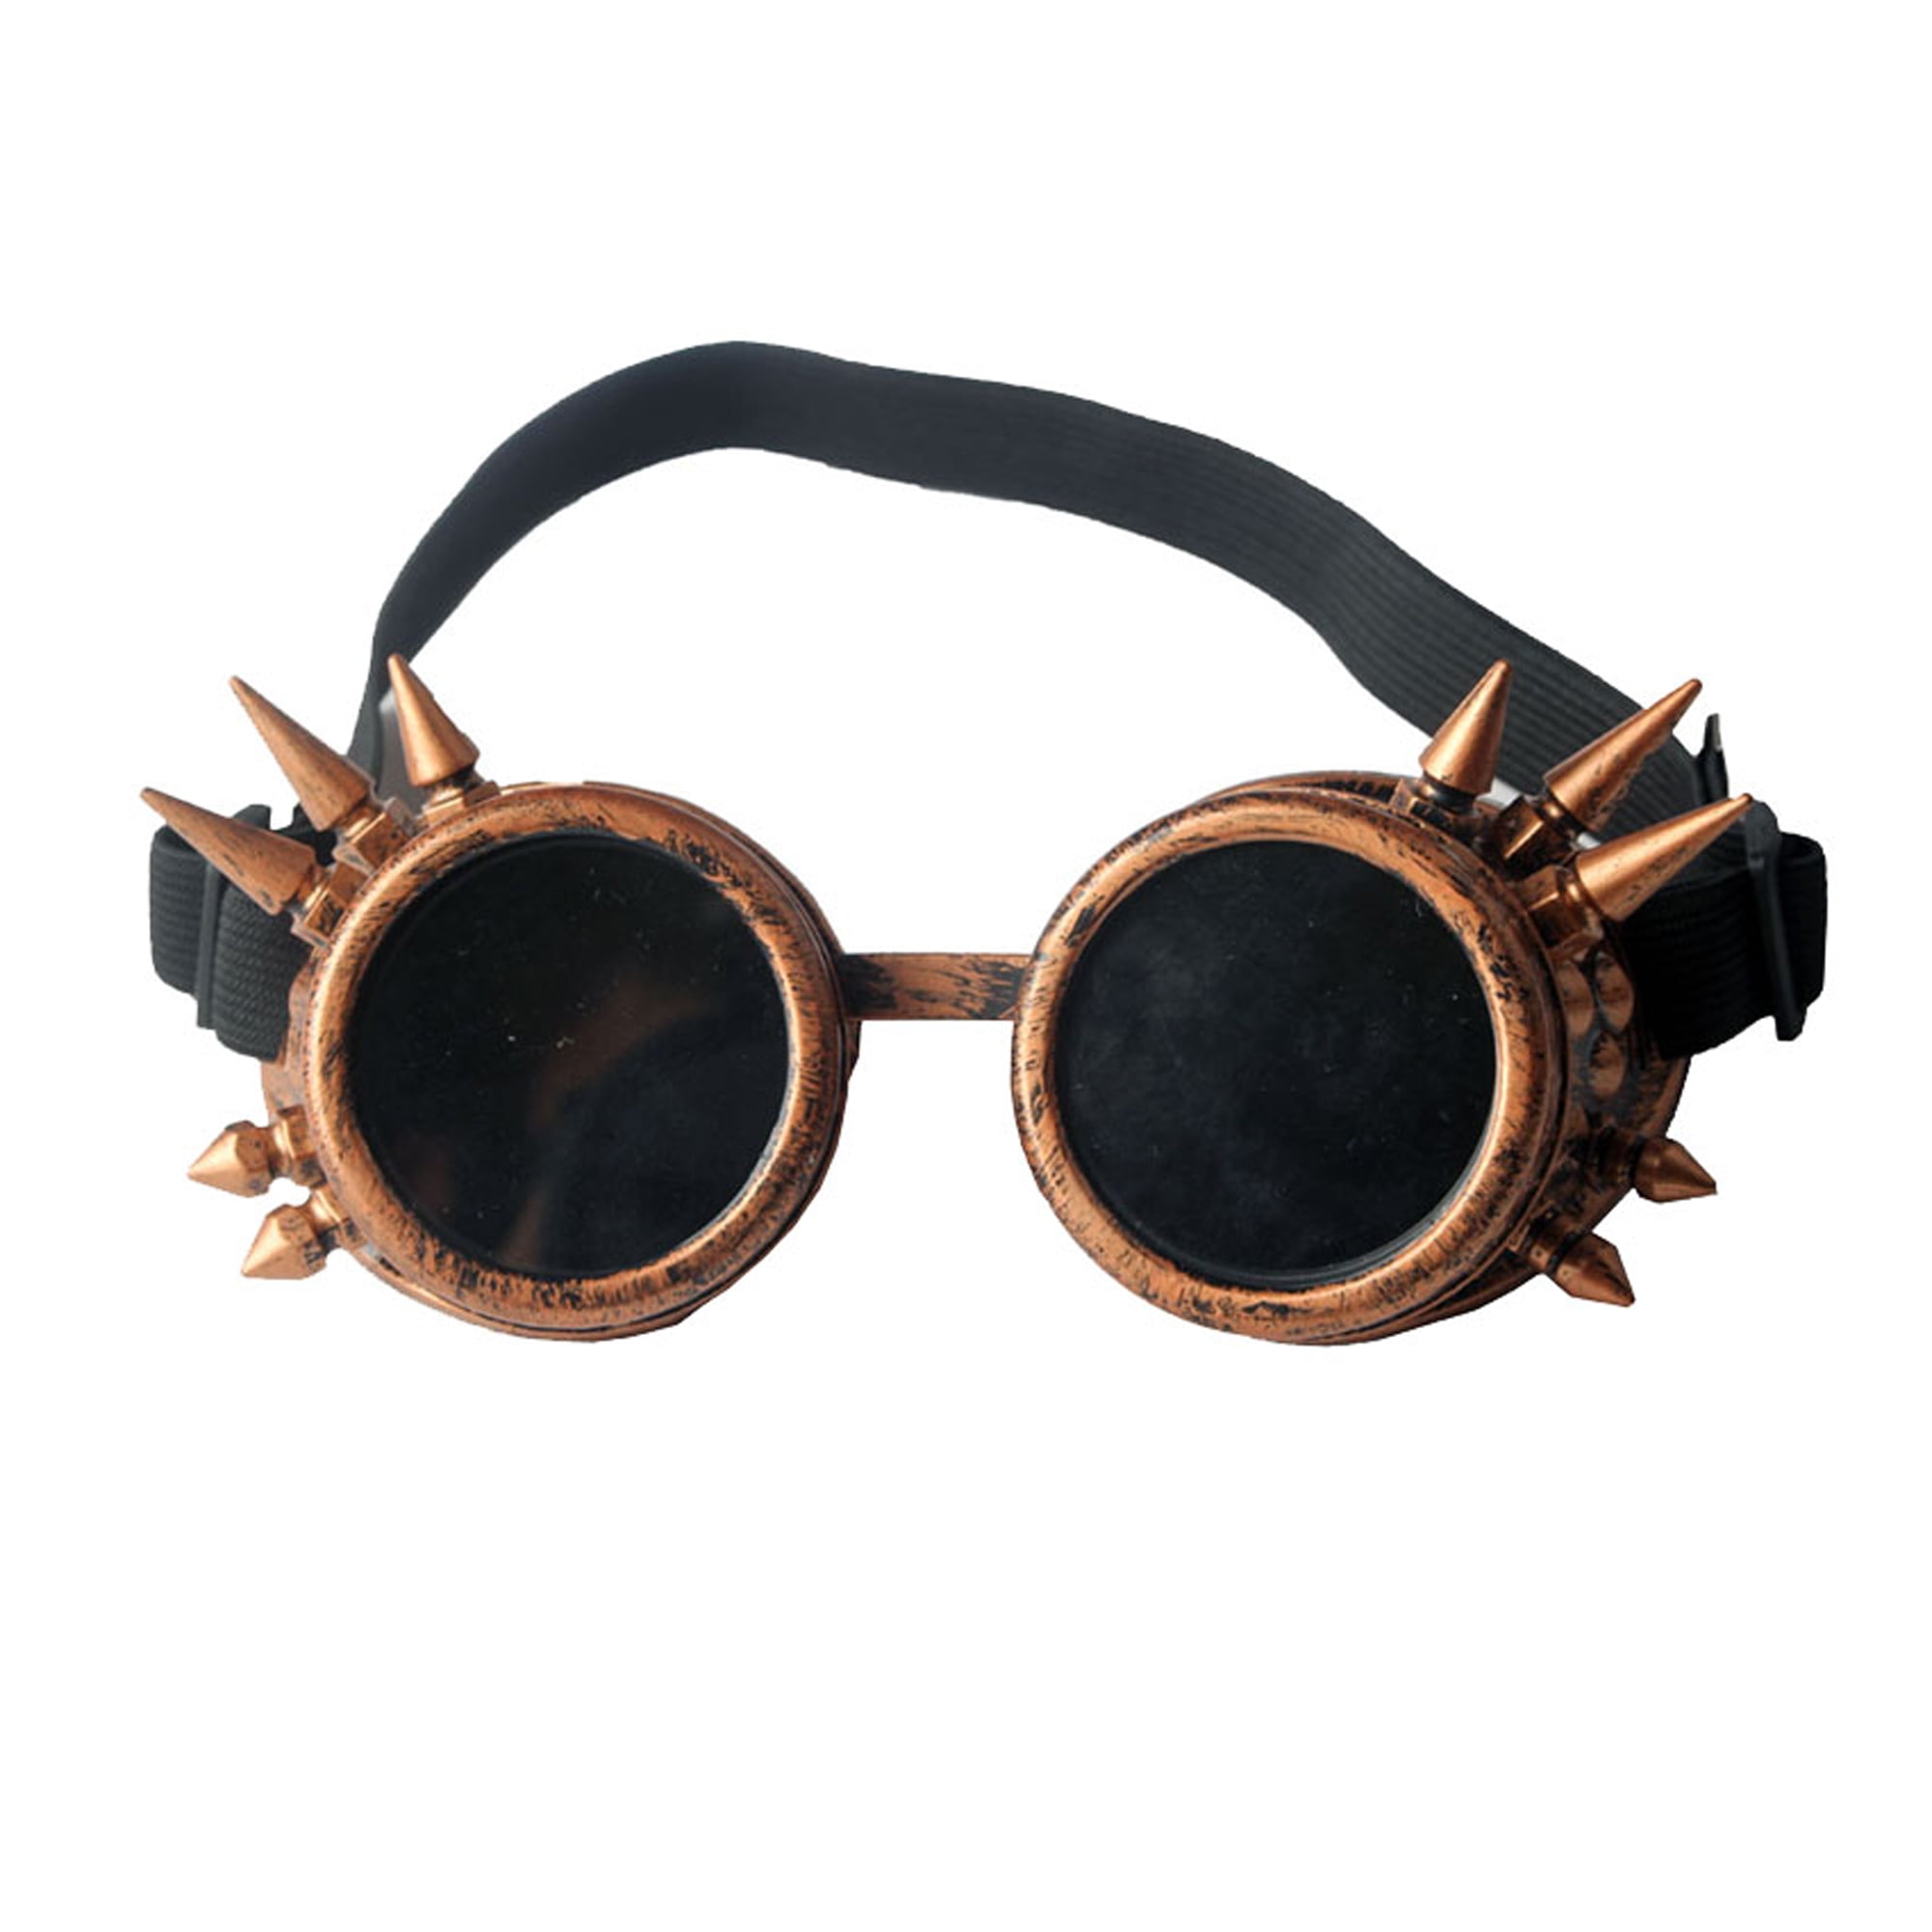 DODOING Steampunk Goggles Vintage Spiked Goggles Glasses Welding Cyber Punk  Gothic Goggles 